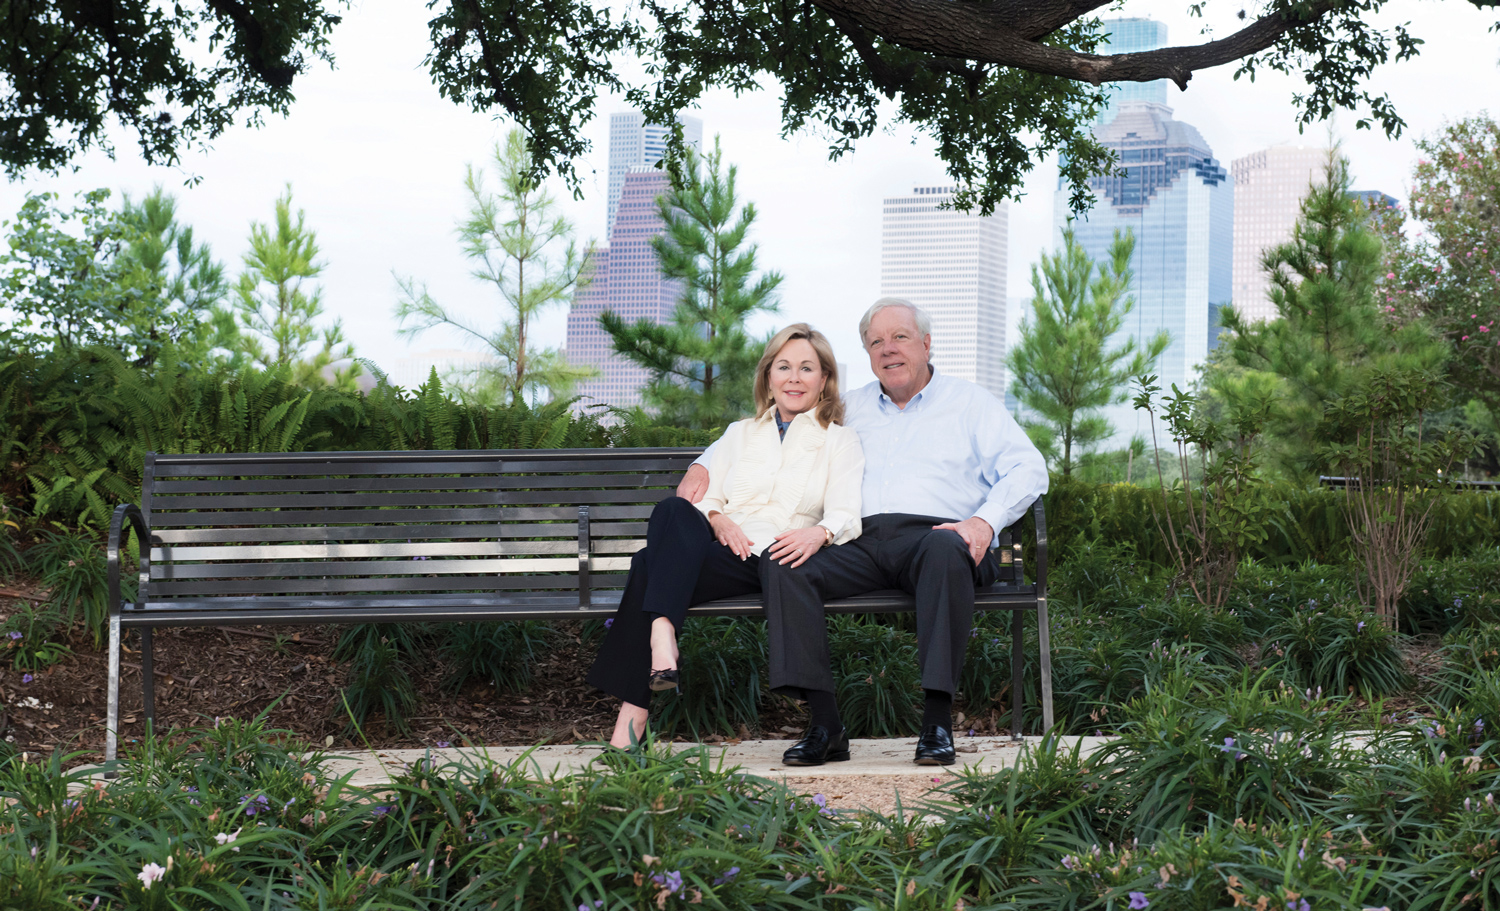 Rich and Nancy Kinder sitting on bench